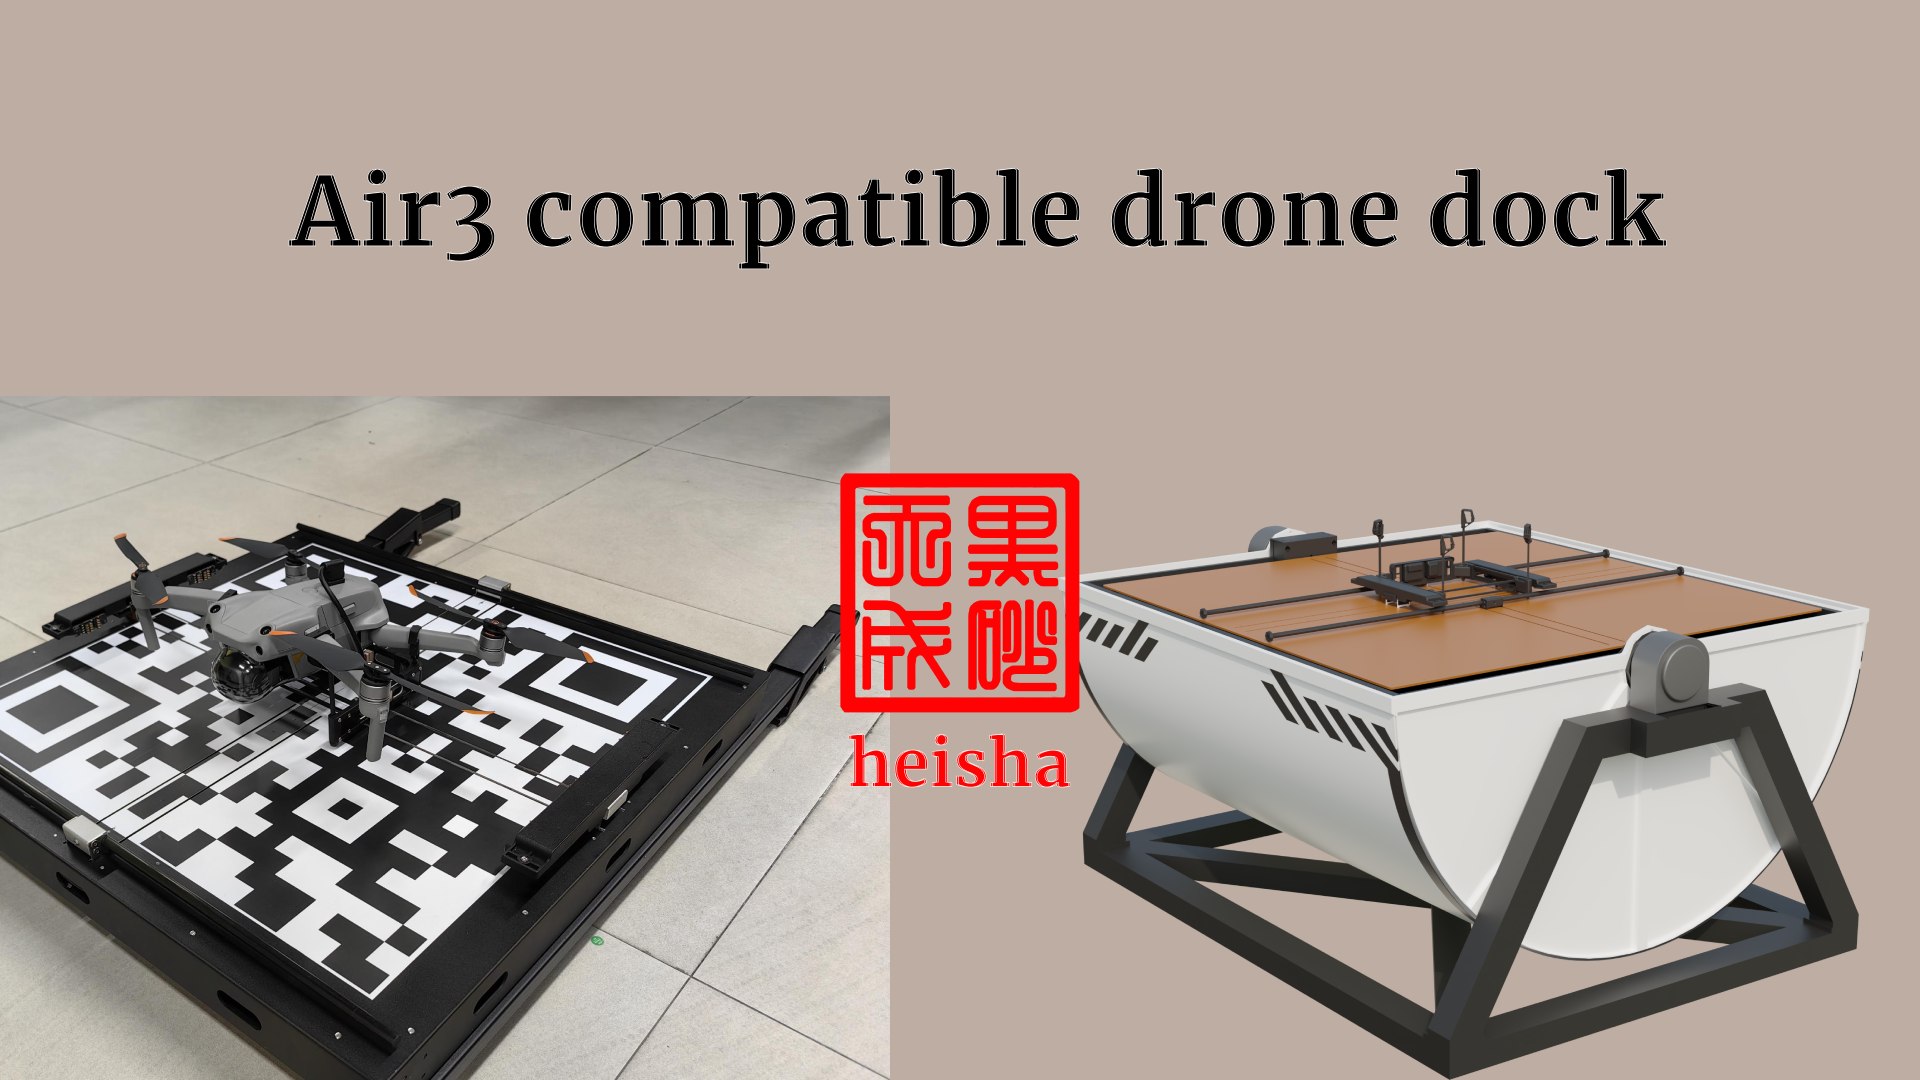 HEISHA drone dock is compatible with DJI Air3